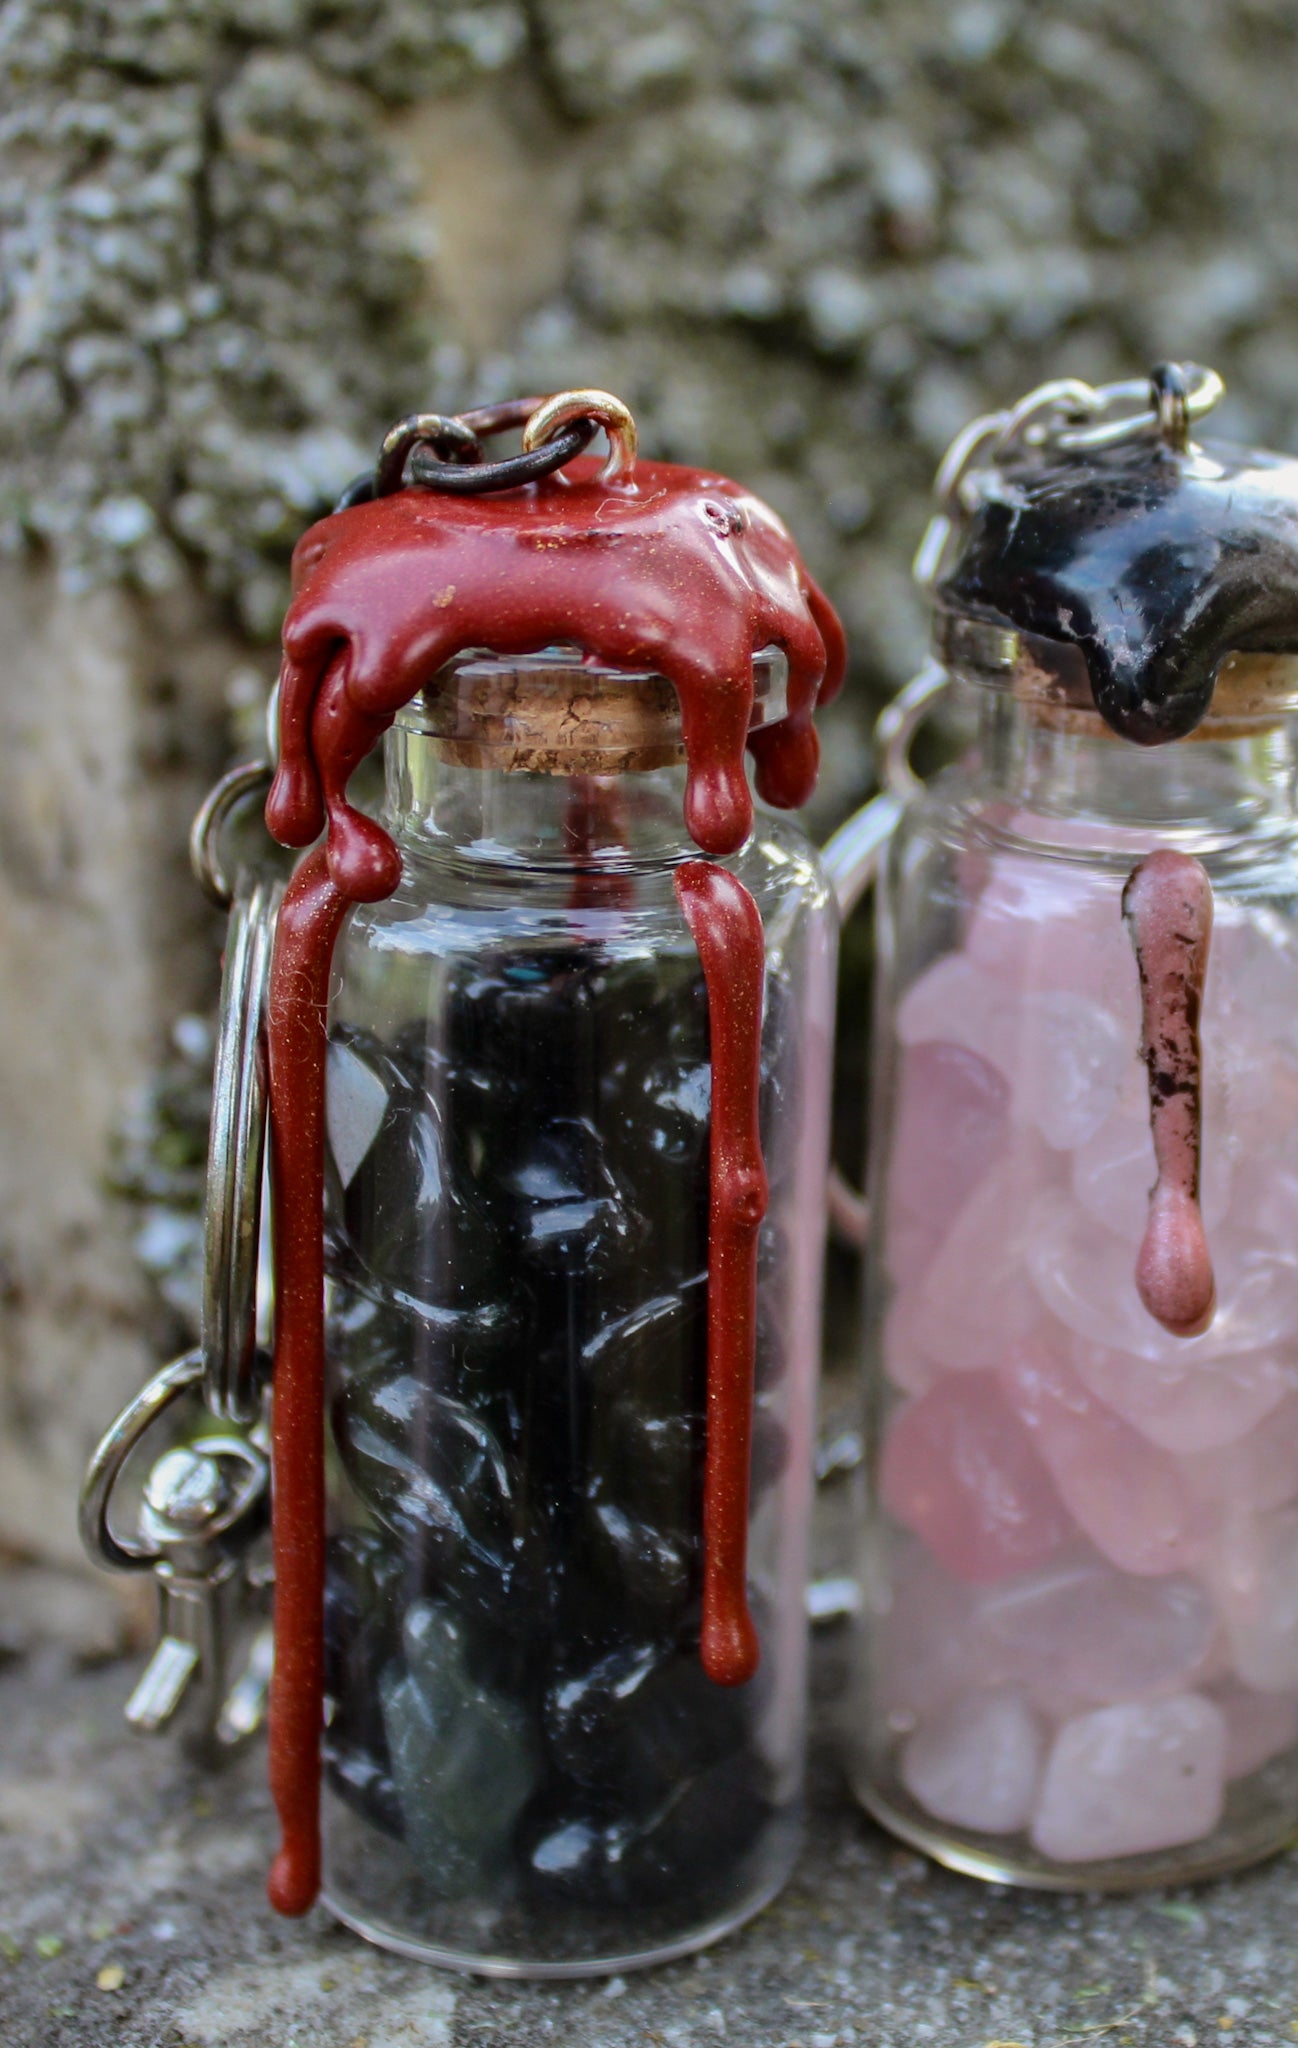 Obsidian, rose quartz crystals inside clear glass jar with wax seals and keychain attachments in front of an old tombstone